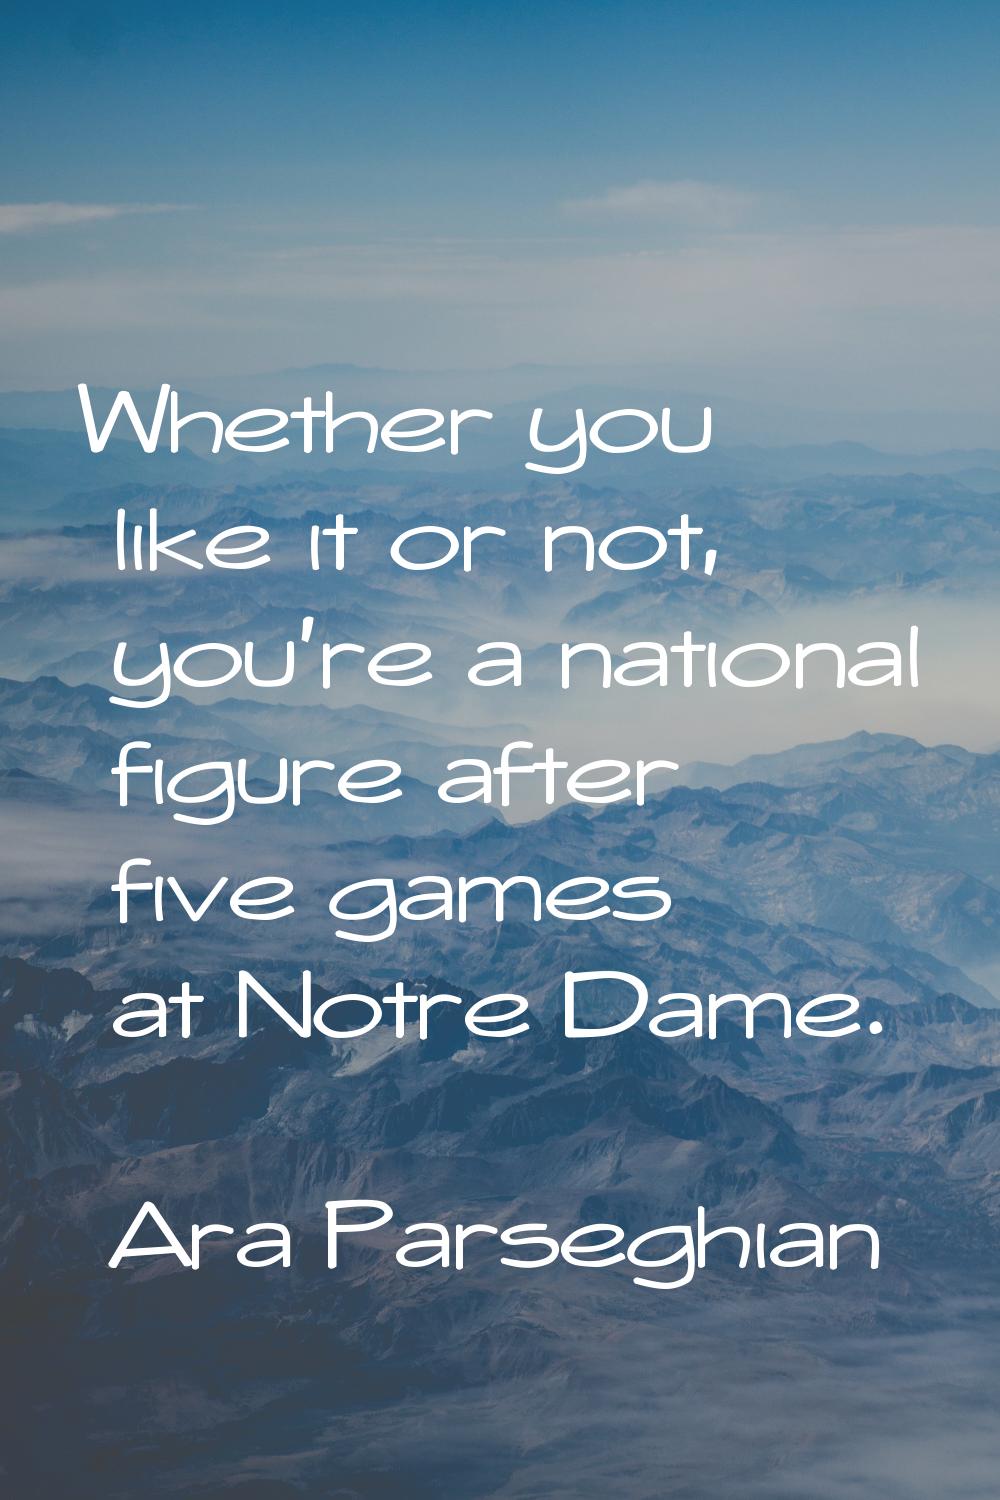 Whether you like it or not, you're a national figure after five games at Notre Dame.